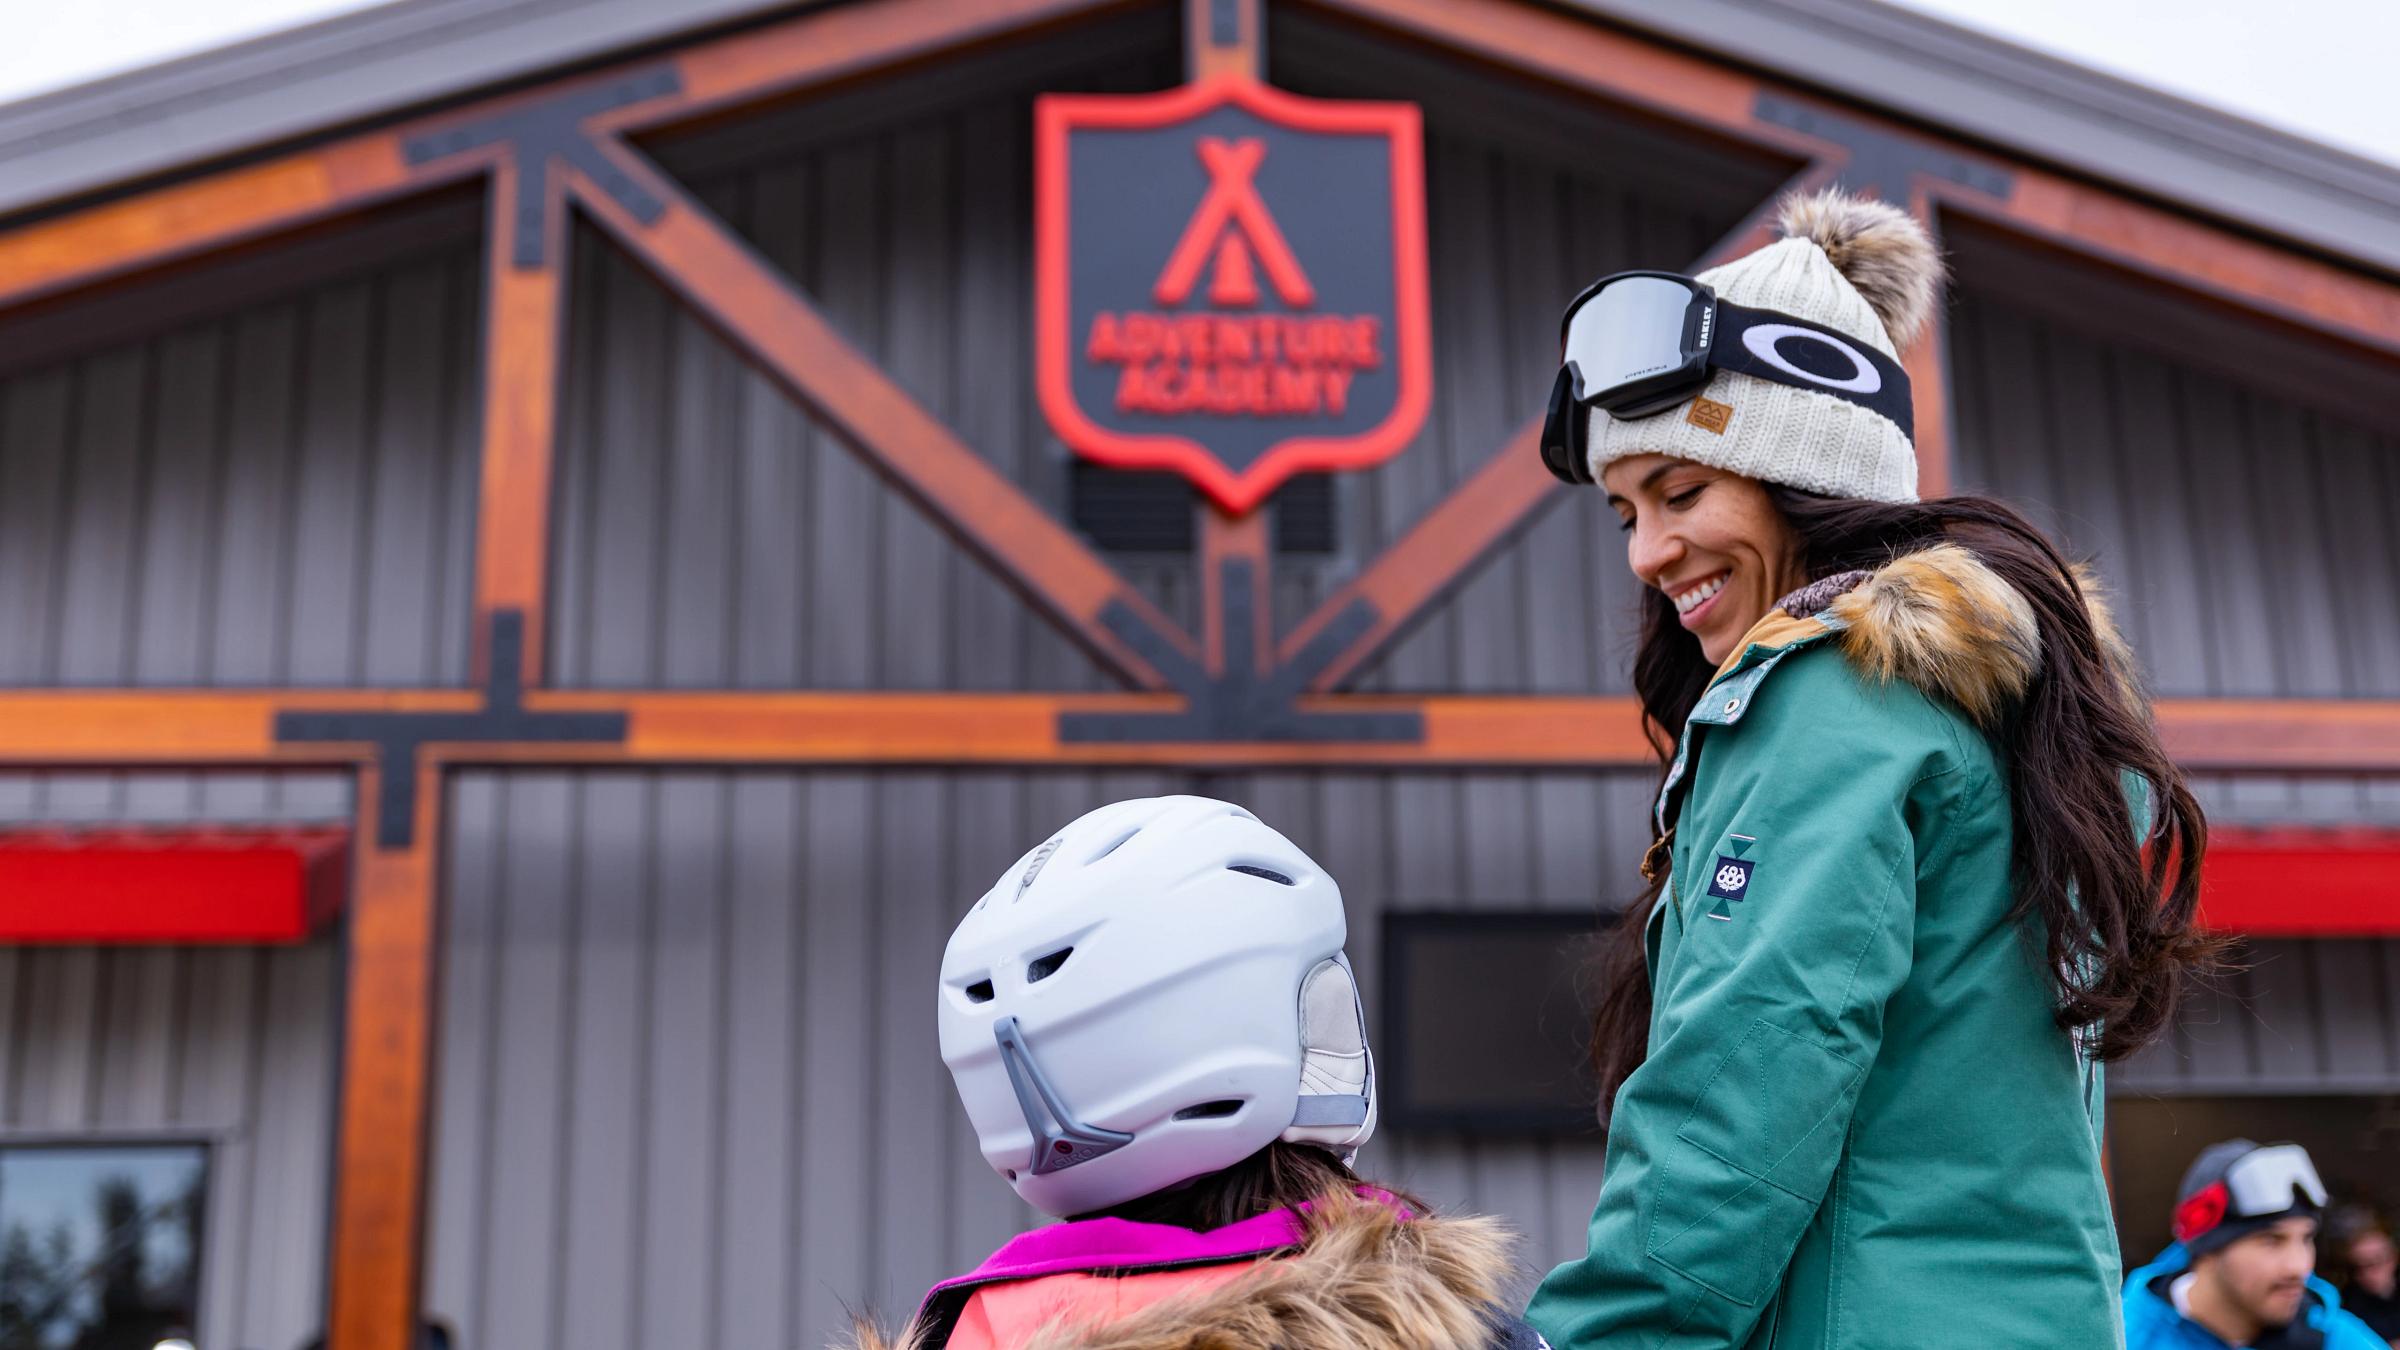 Mom taking daughter into the Adventure Academy for a ski lesson